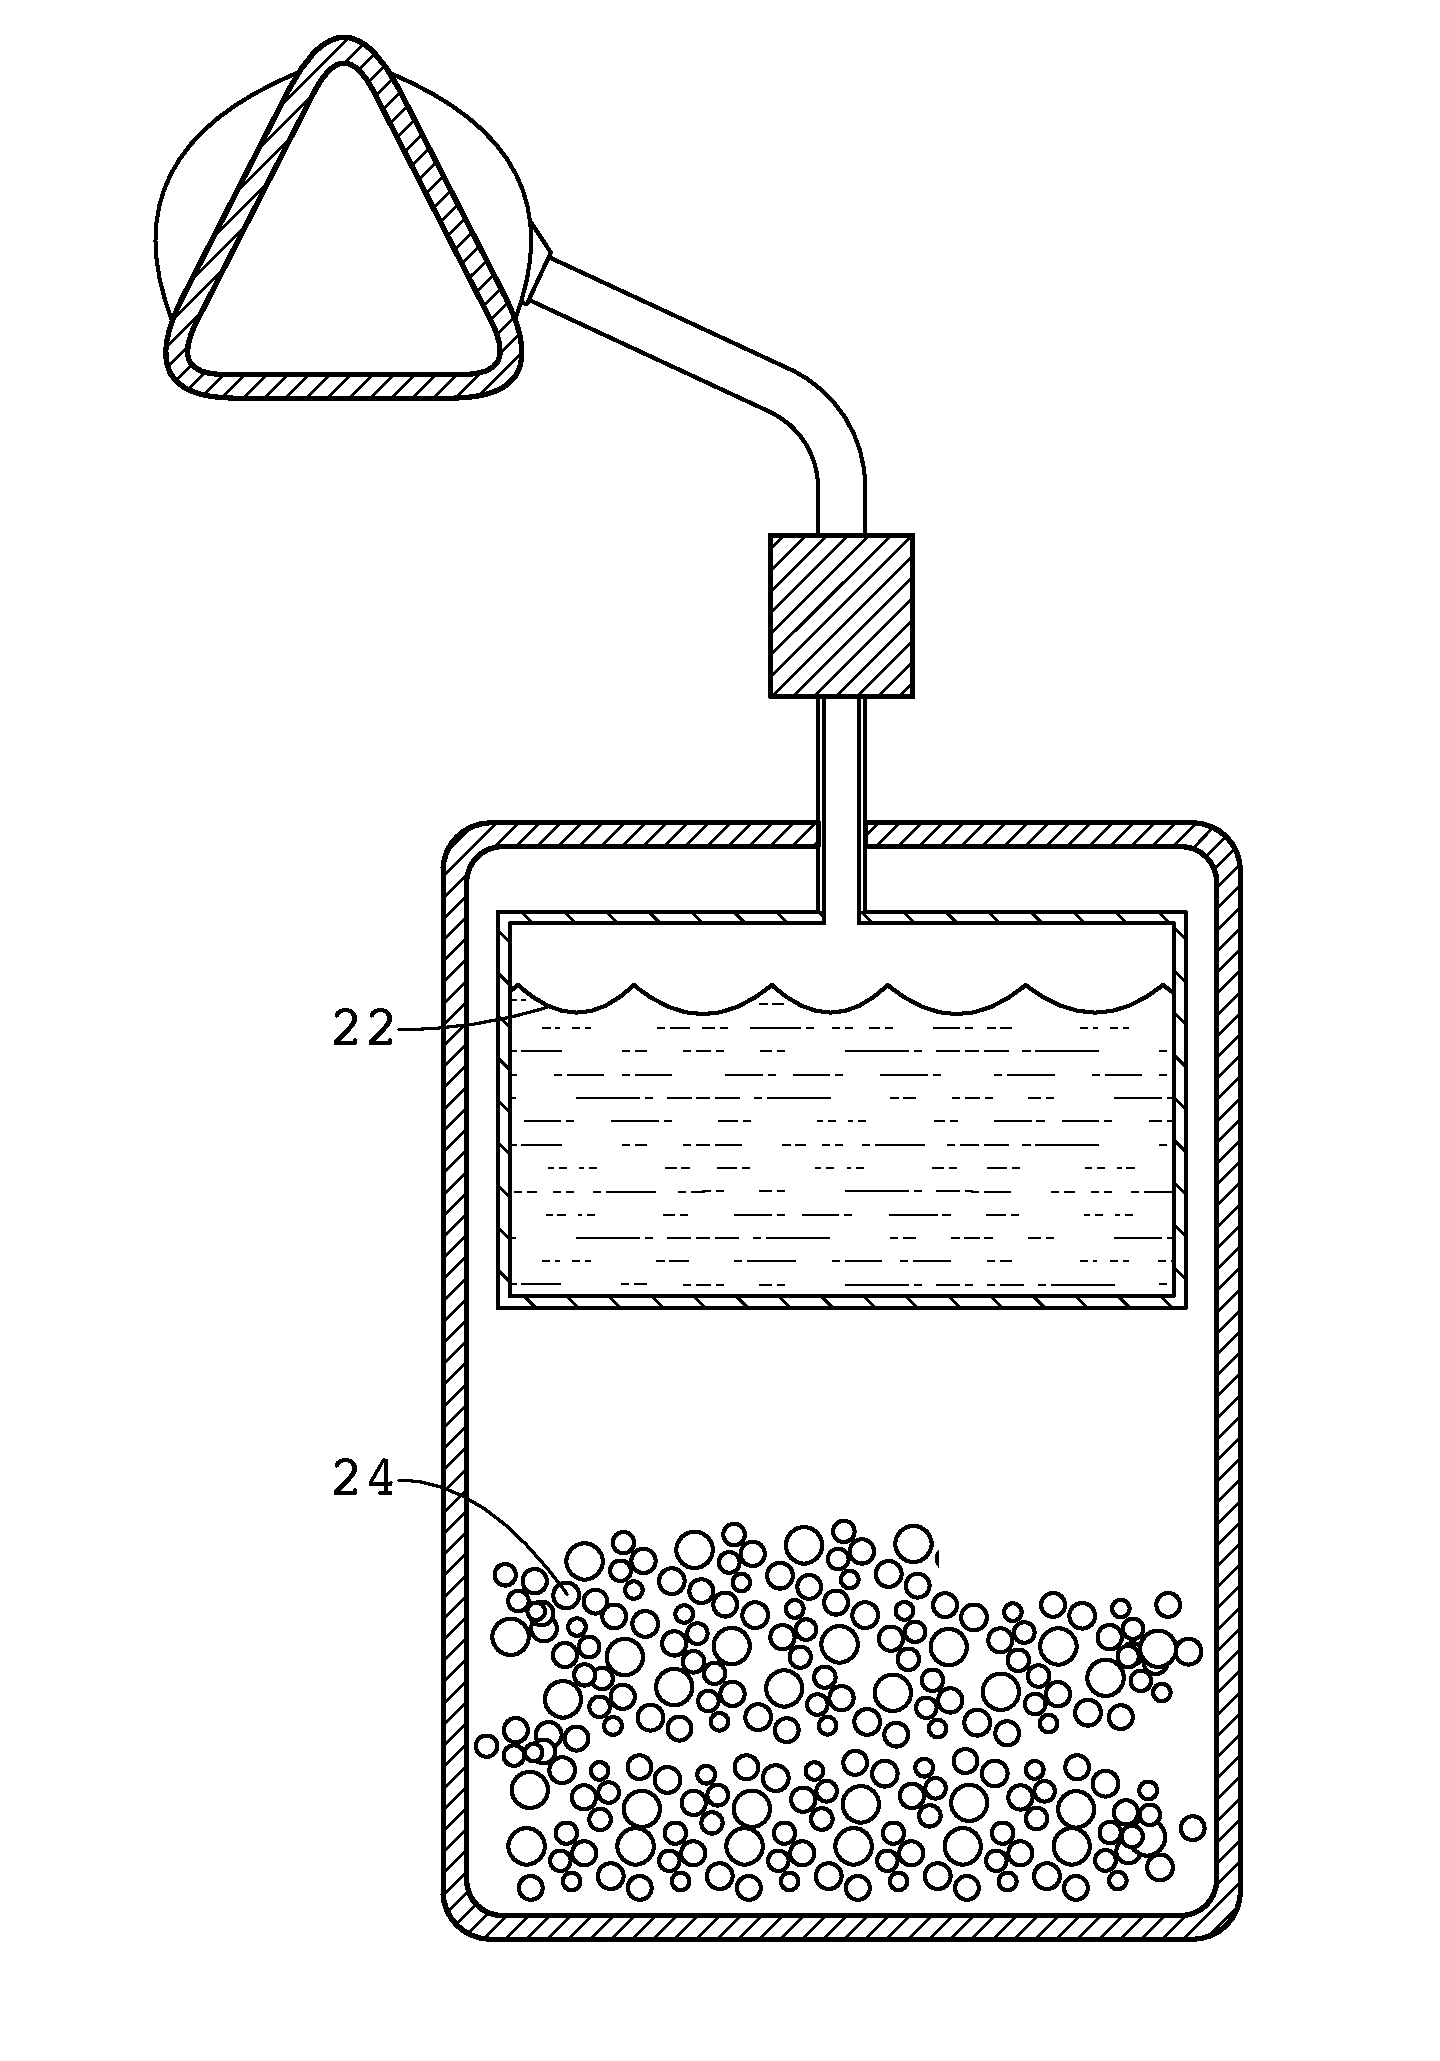 Apparatus and methods of providing diatomic oxygen (O<sub>2</sub>) using ferrate(VI)-containing compositions